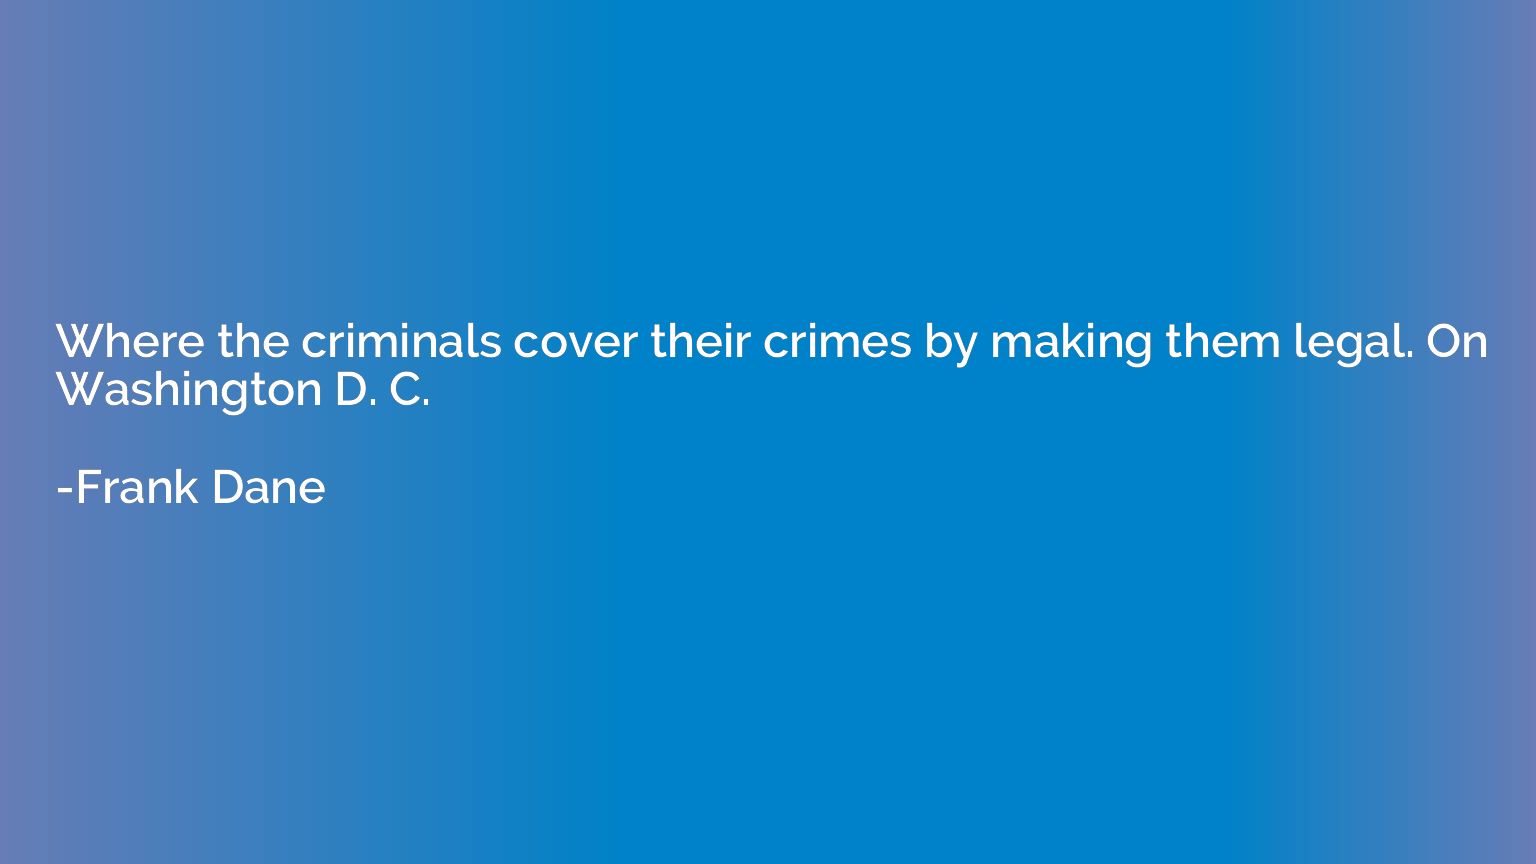 Where the criminals cover their crimes by making them legal.